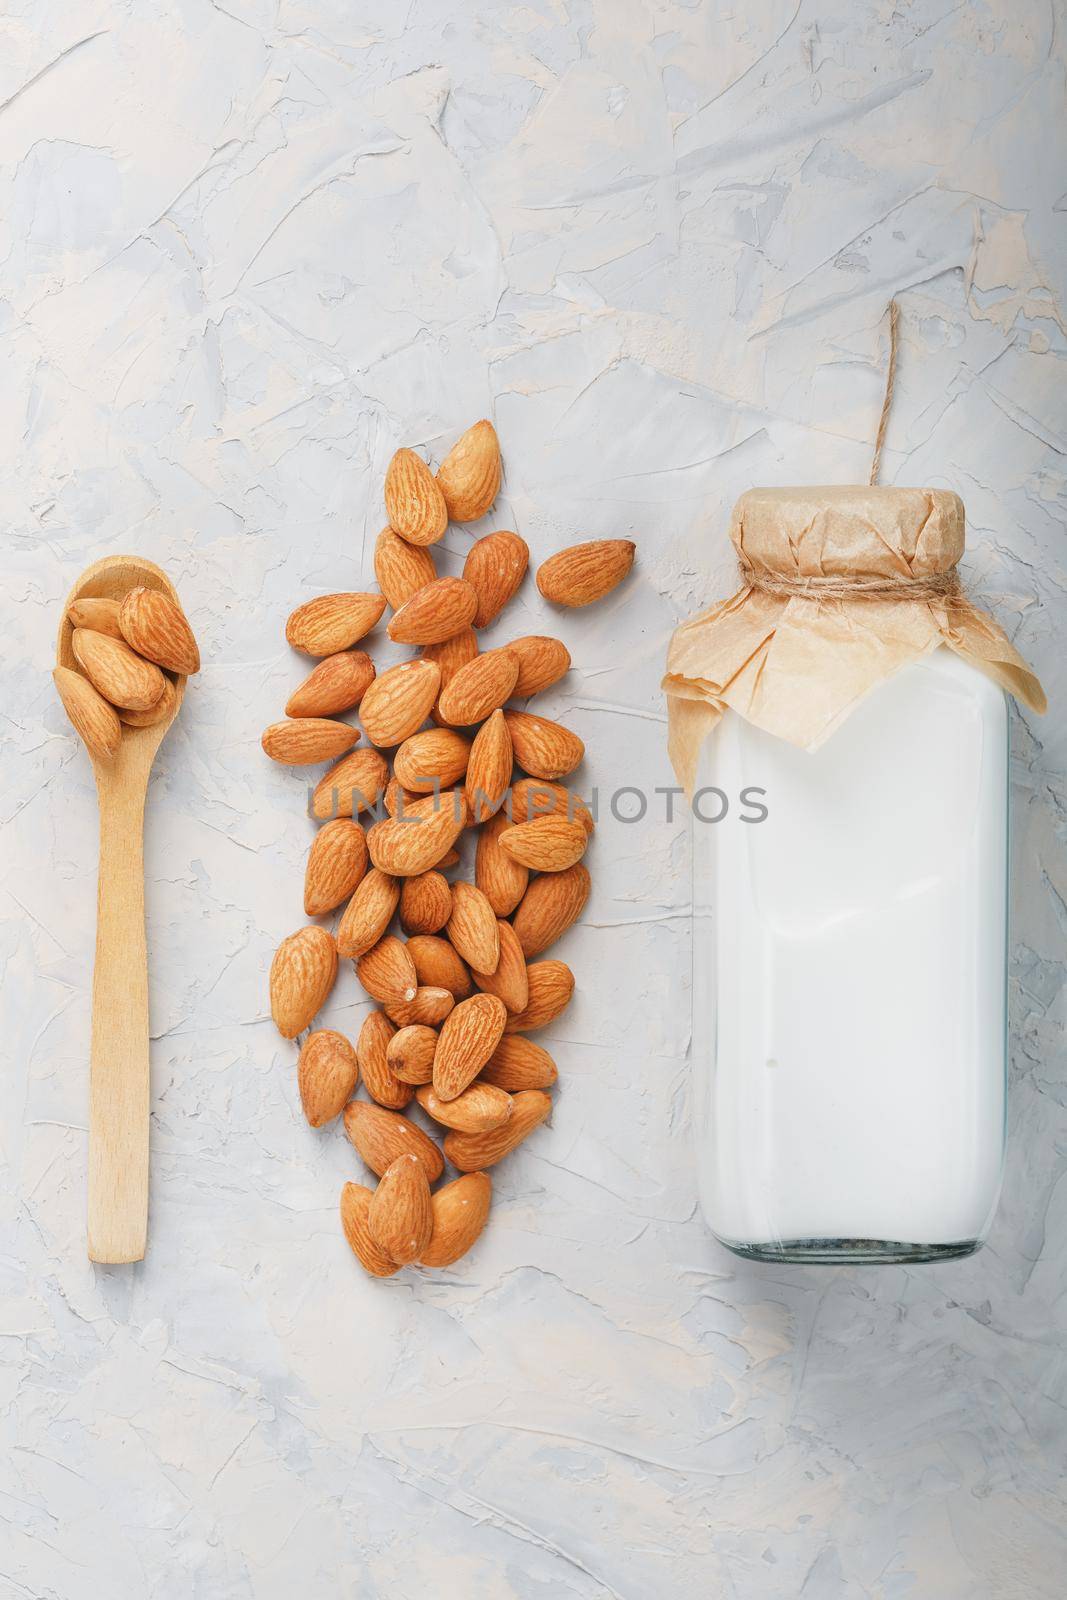 Vegan Milk from a handful of organic almond seeds in a bottle on a light background. by AlexGrec